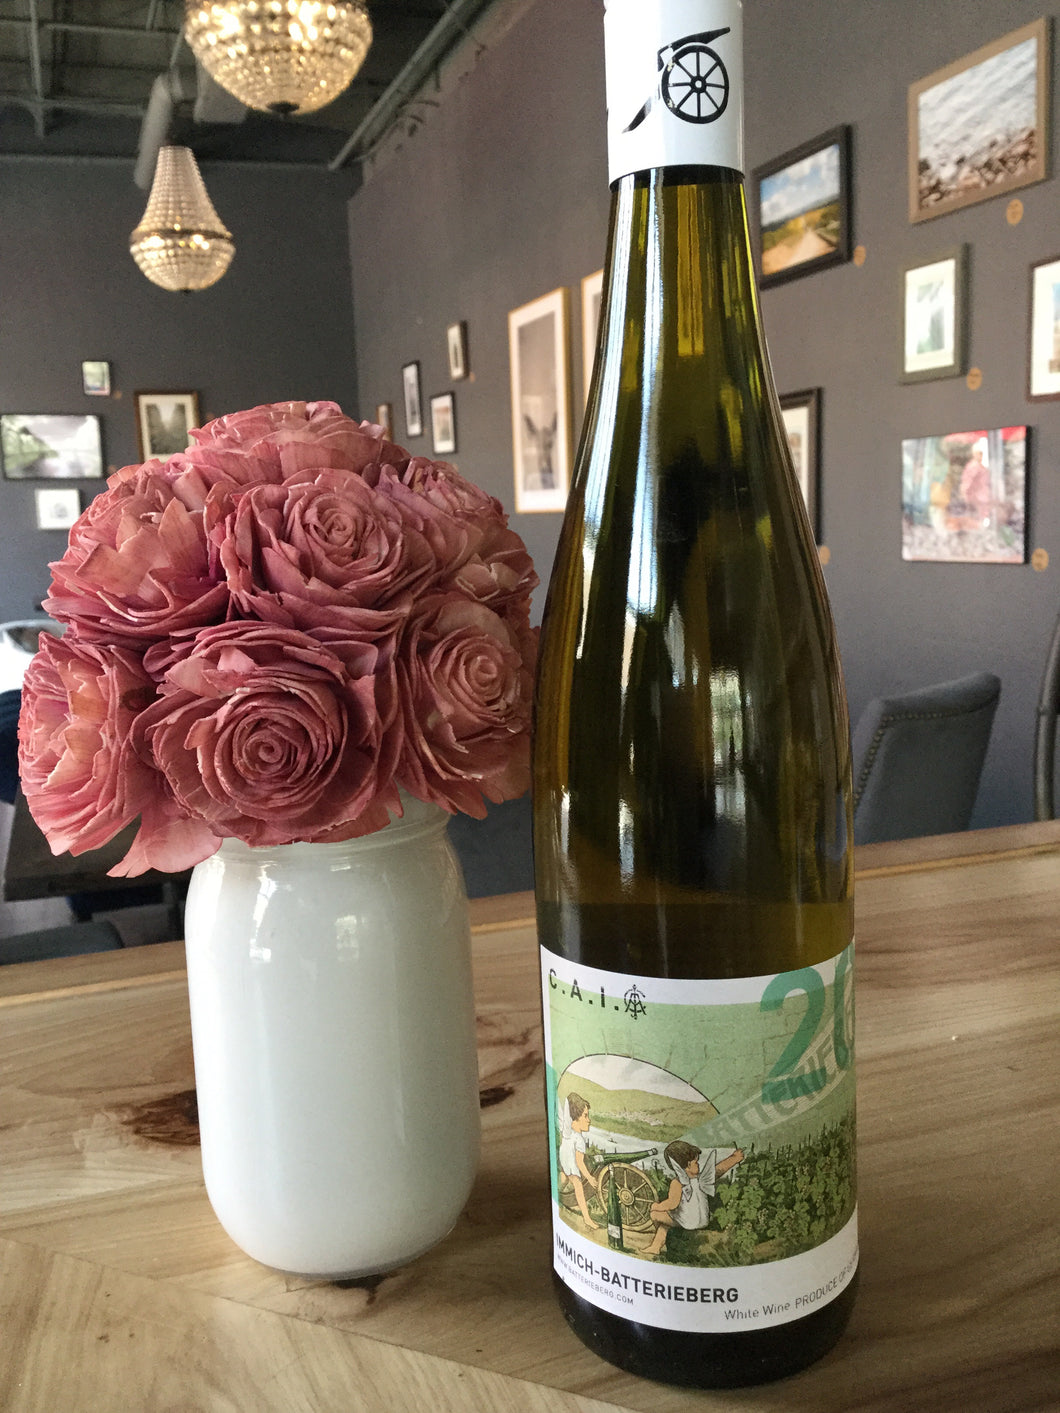 Immich-Batterieberg Mosel Riesling “CAI”